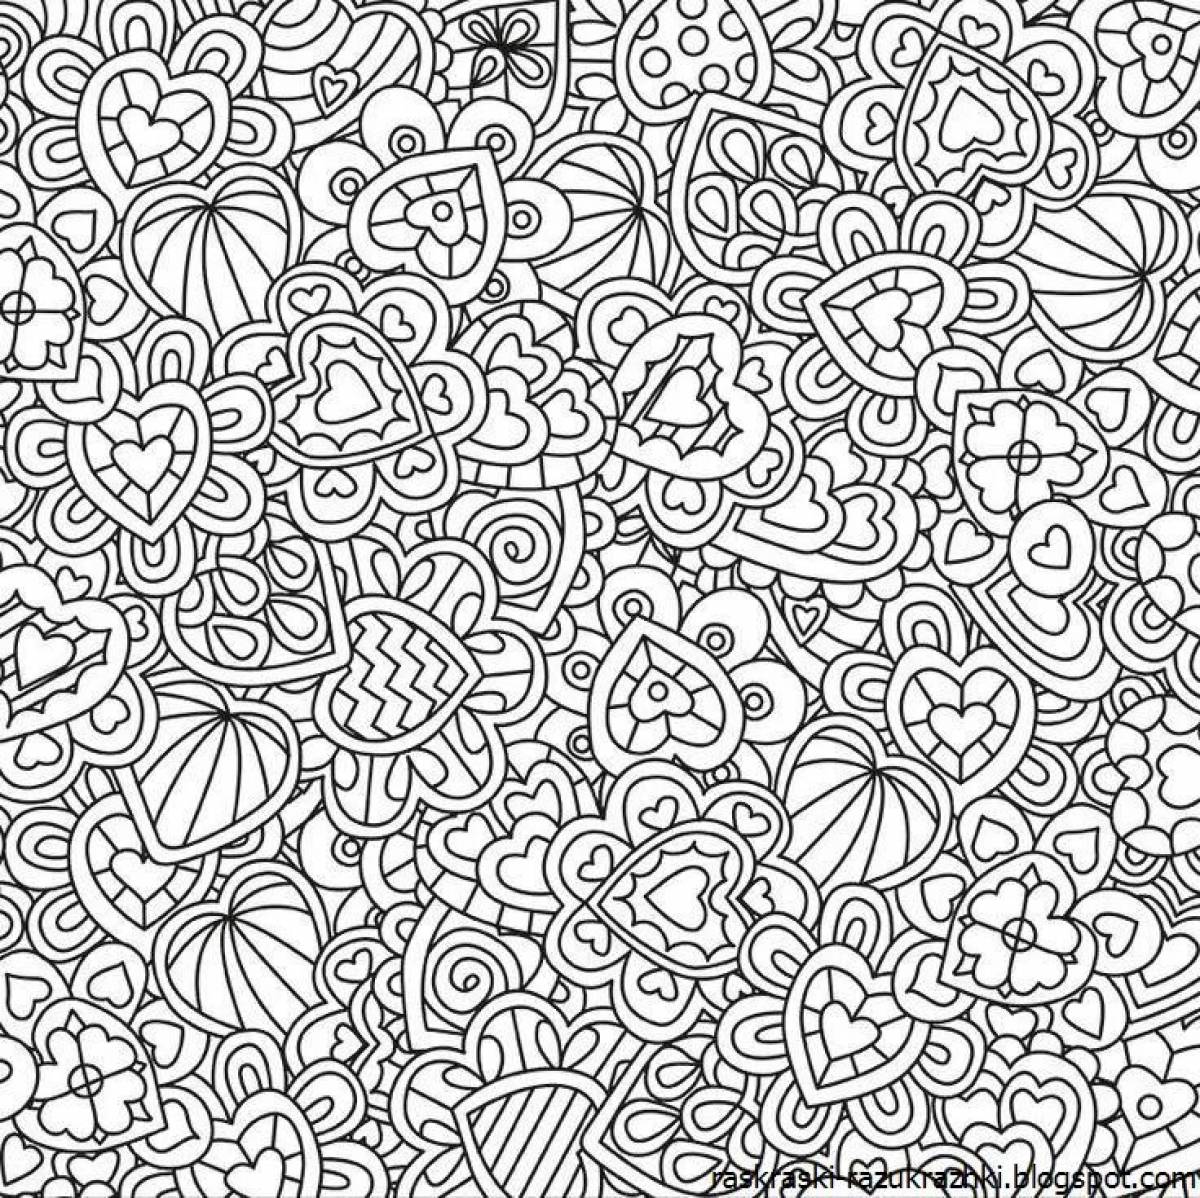 Coloring page charming anti-stress patterns